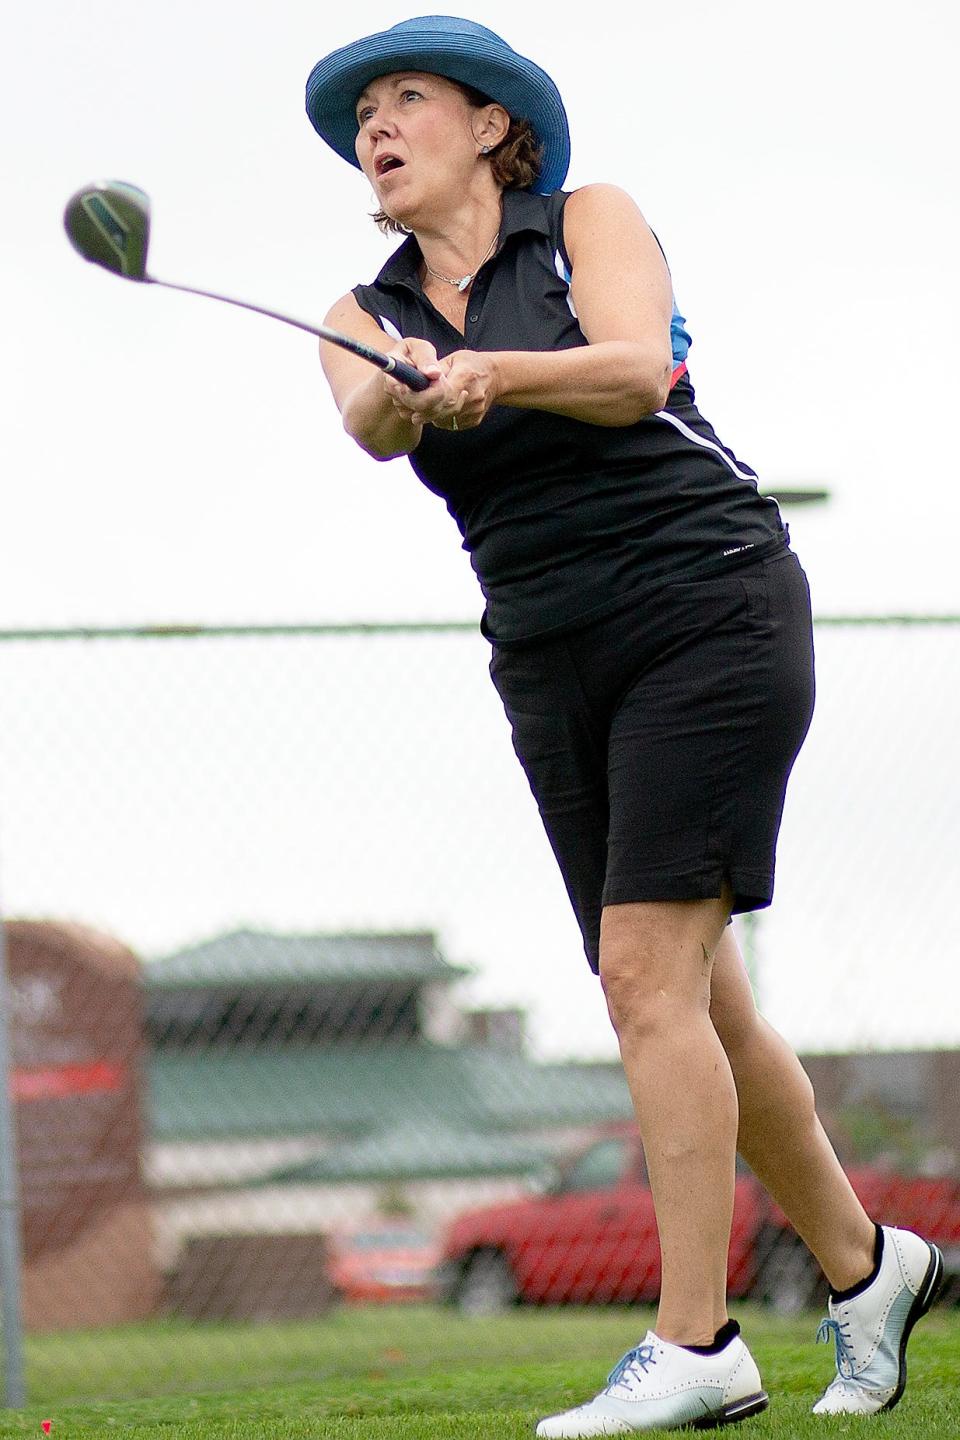 Lorie Larsen eyes her drive from the third tee at Bunker Links during the opening round of the Galesburg Women' All-City Golf Tournament on Tuesday, July 21, 2020.